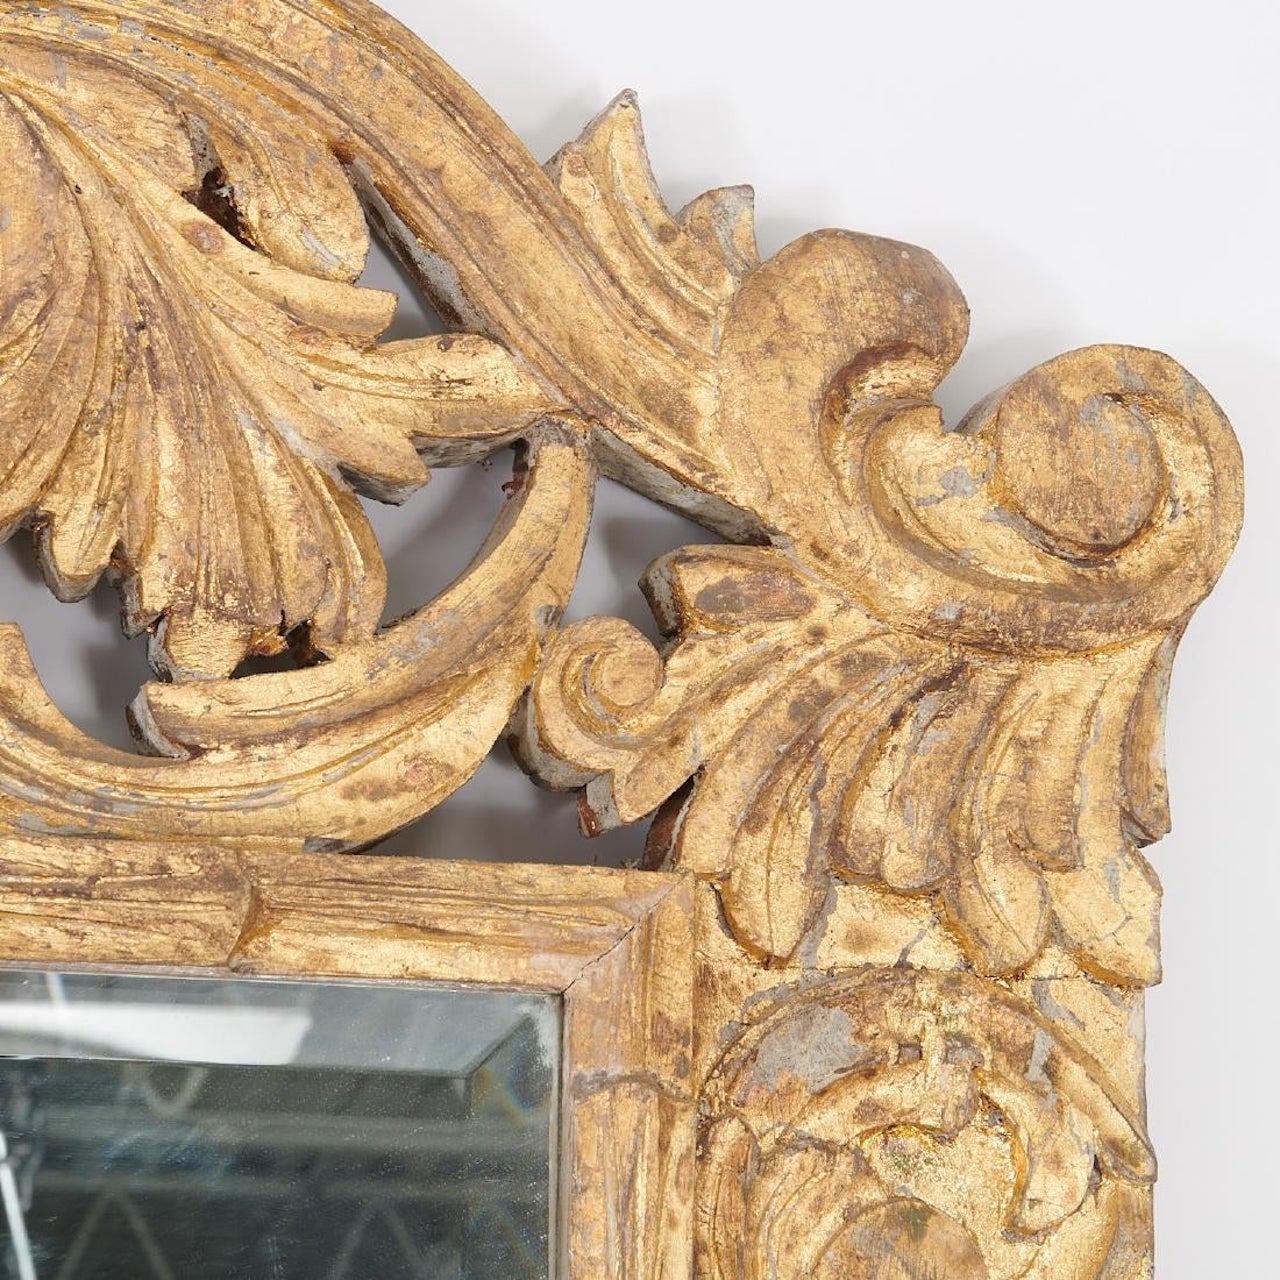 Spanish Baroque style carved wood framed mirror with gold wash finish surrounding a beveled edged mirror center.
Can be used as a floor mirror or hung on the wall.